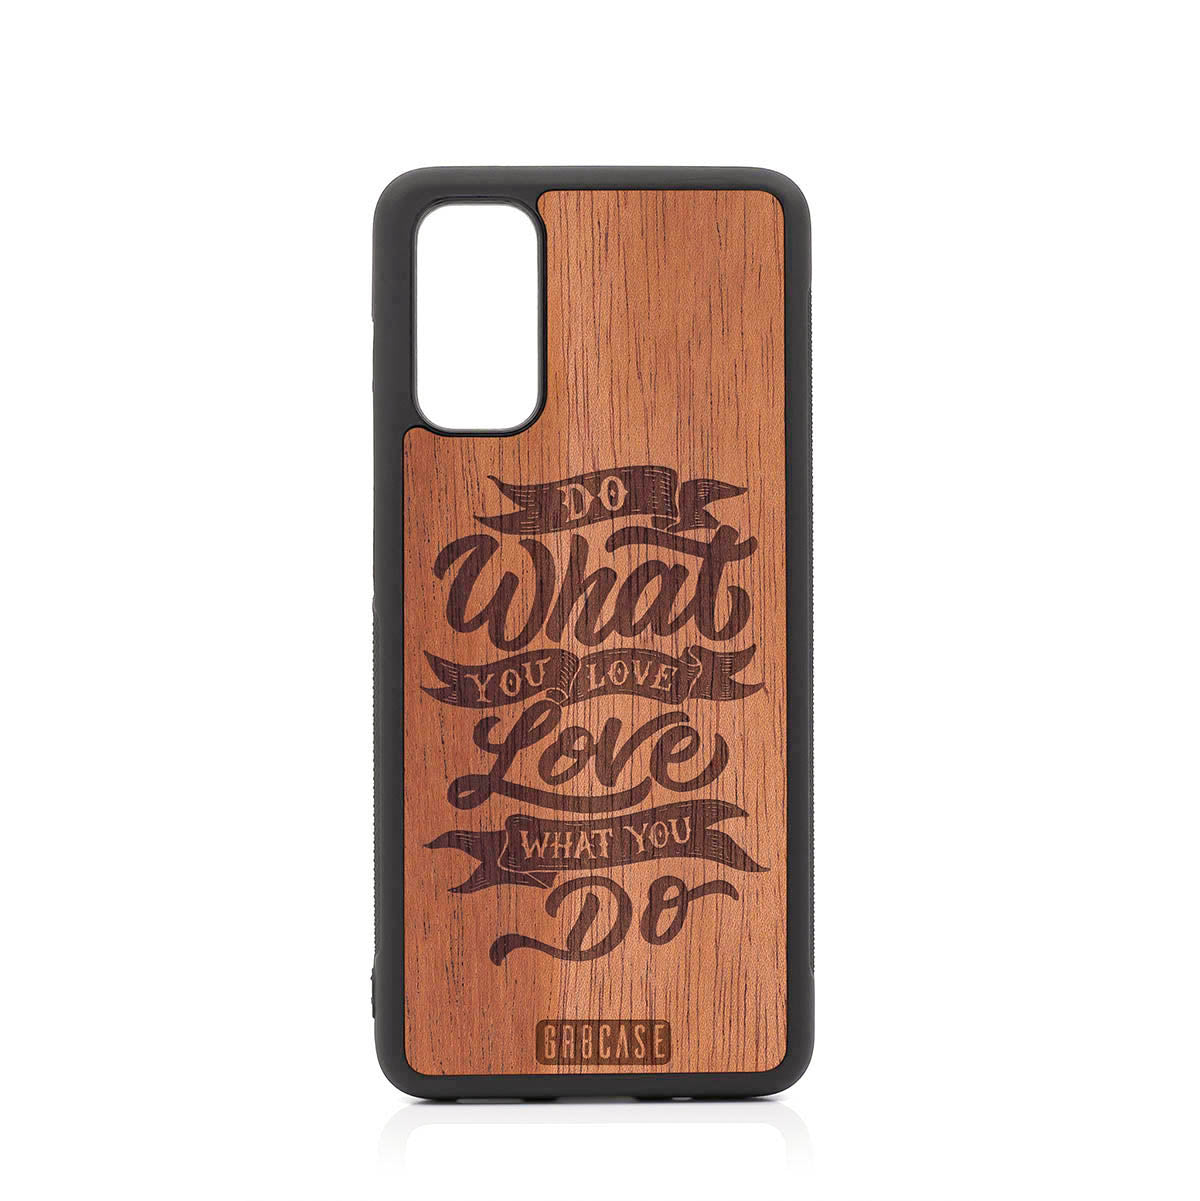 Do What You Love Love What You Do Design Wood Case For Samsung Galaxy S20 by GR8CASE